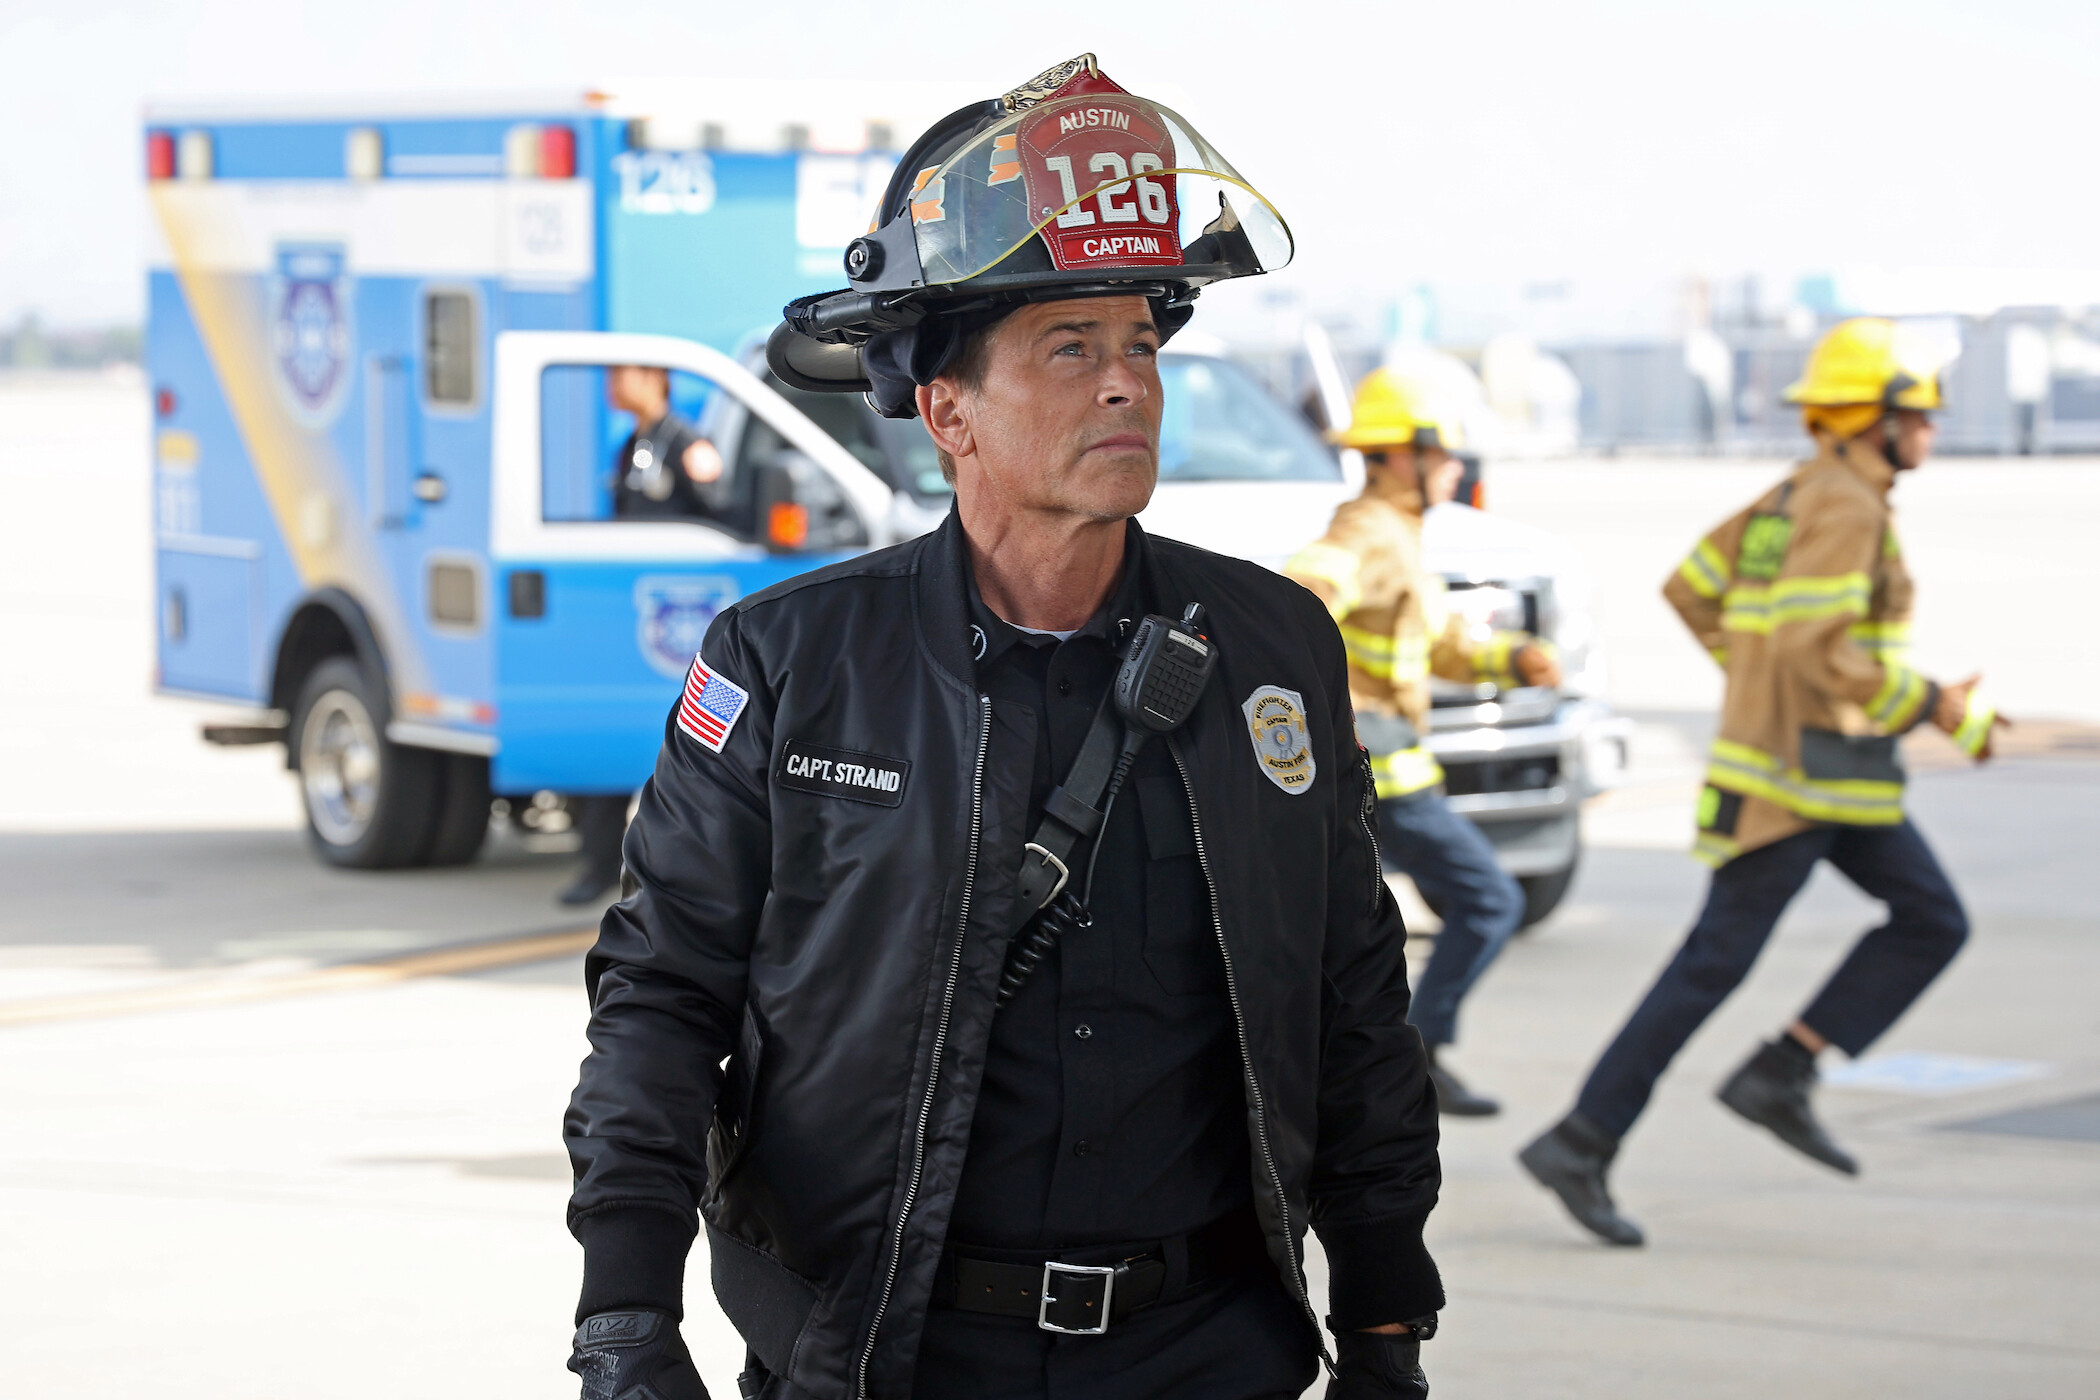 9-1-1: Lone Star (TV Series): Captain Owen Strand, Firefighter Captain From New York City, 126, Protective Helmet. 2100x1400 HD Background.